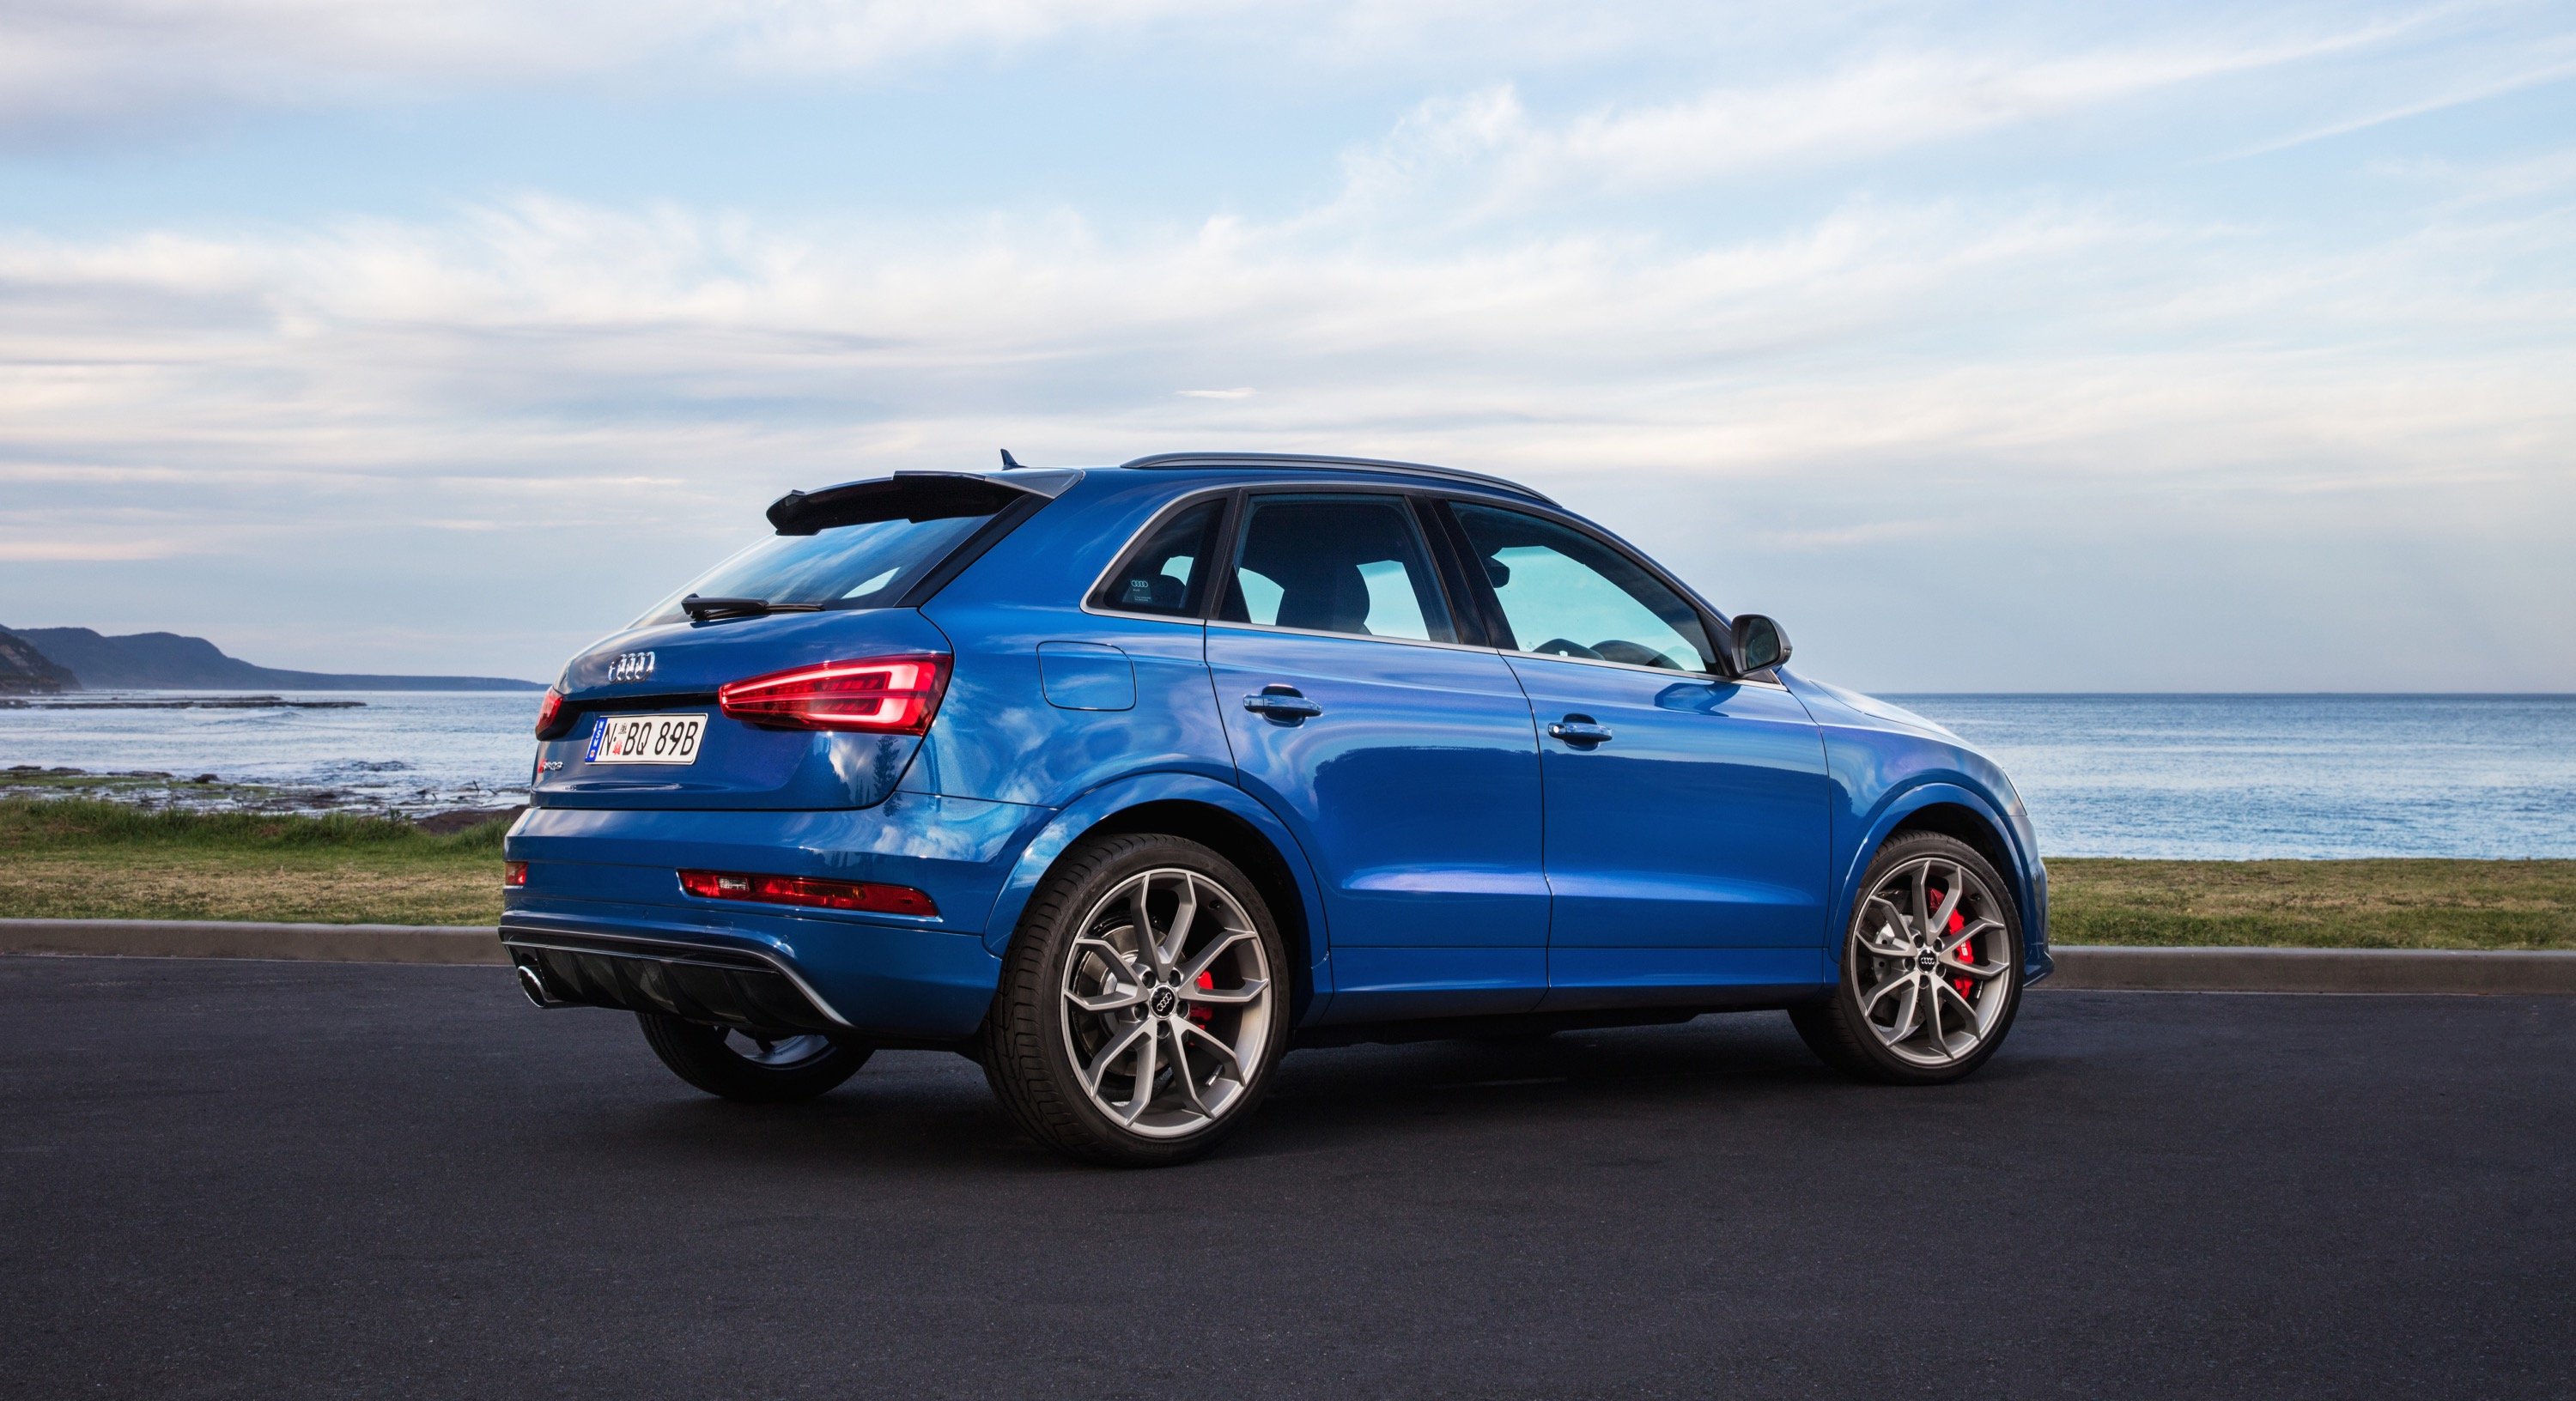 A Thrilling Ride: The 2017 Audi RS Q3 Performance